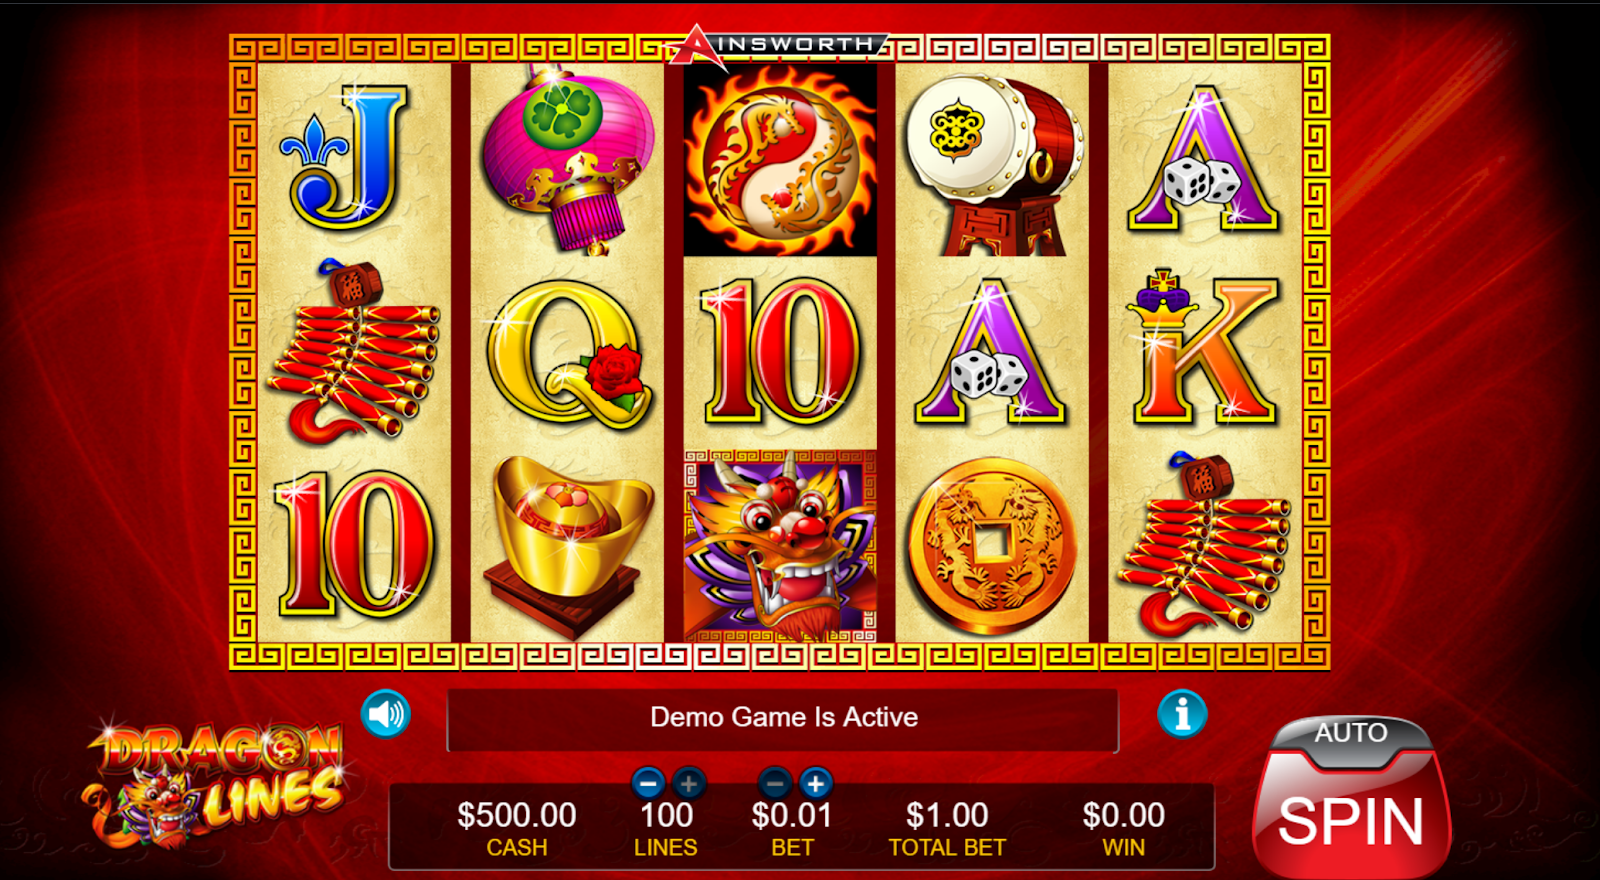 A screenshot of a red dragon slots game at resorts casino with symbols of lantern, dice, coins and dragons. 